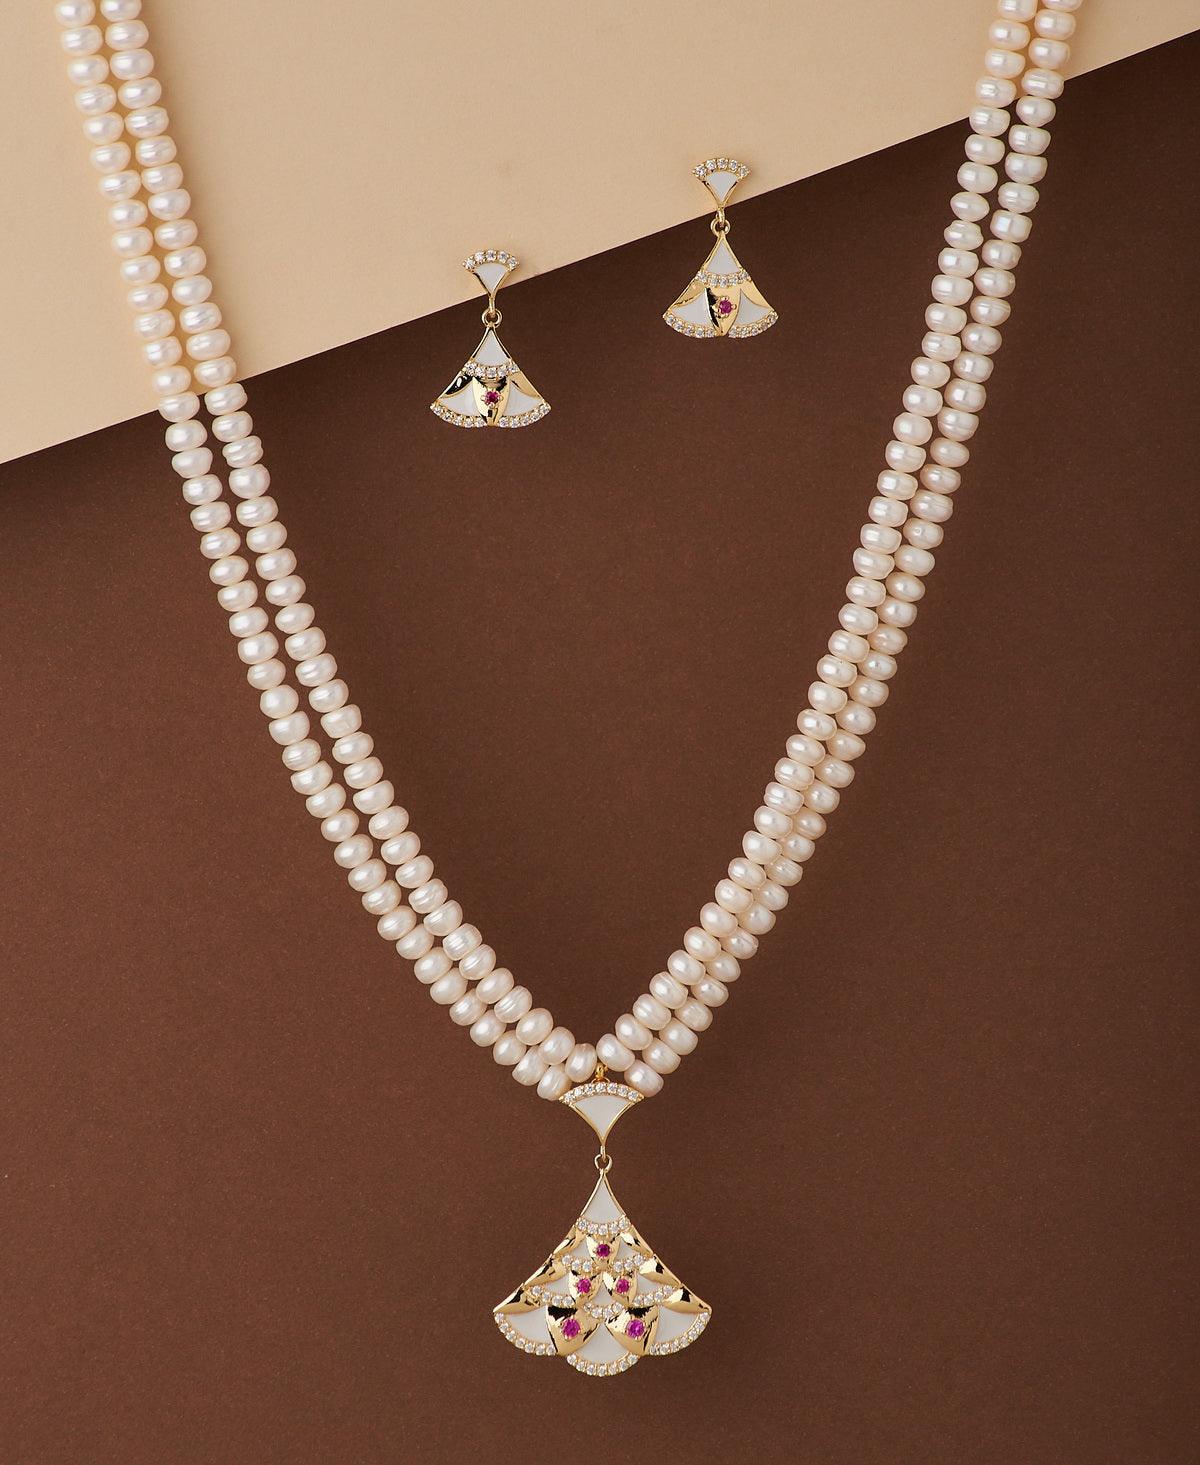 Buy White Pearl Long Necklace With Polki Online At Best Price @ Tata CLiQ